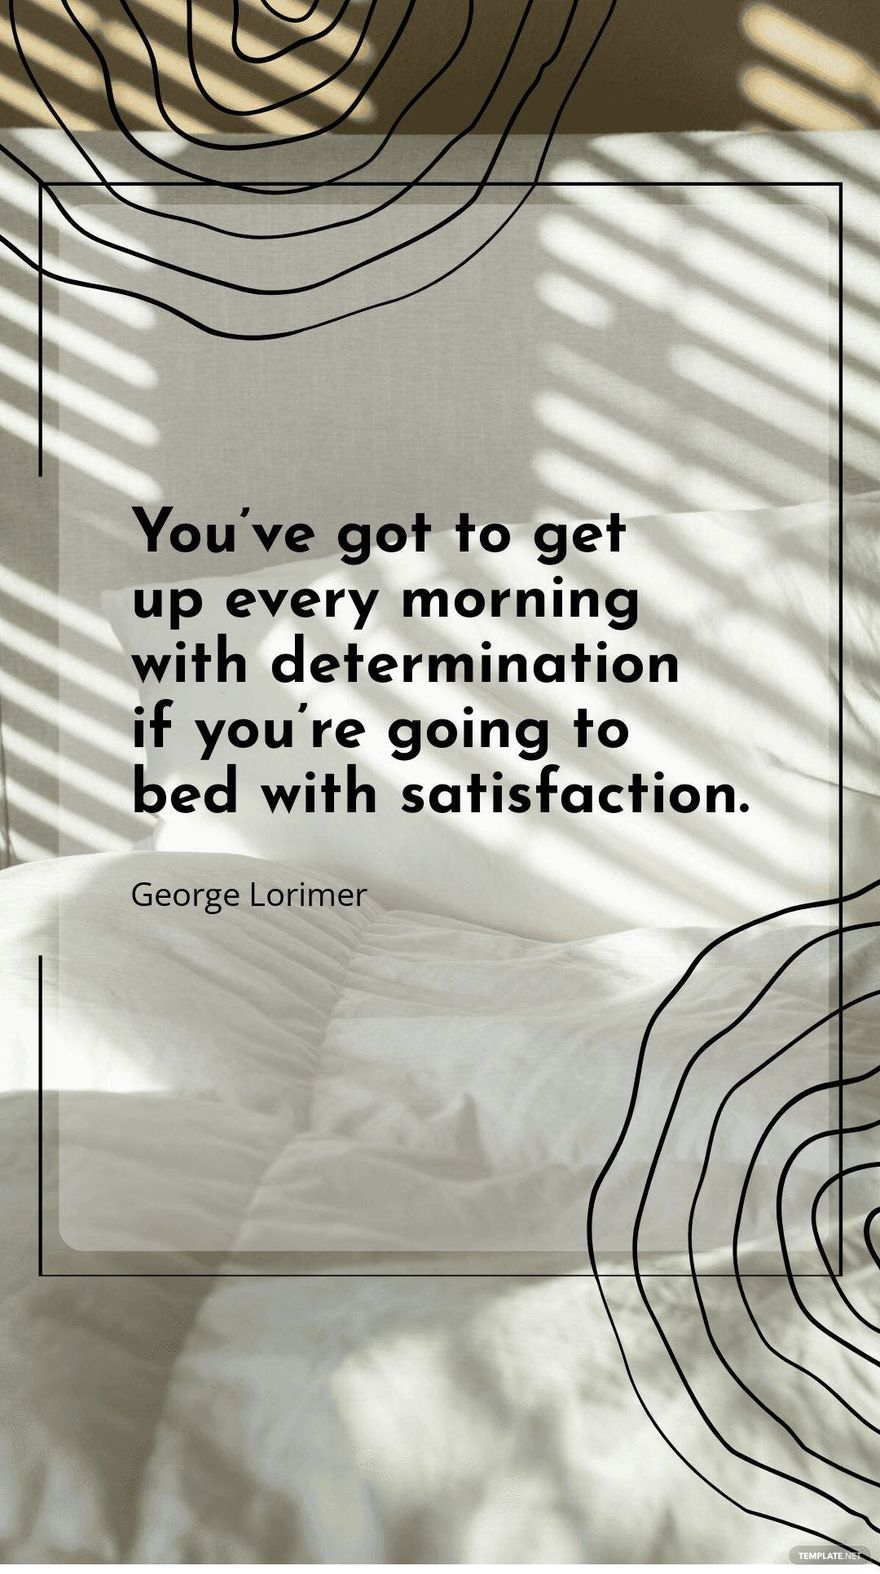 George Lorimer - You’ve got to get up every morning with determination if you’re going to bed with satisfaction.